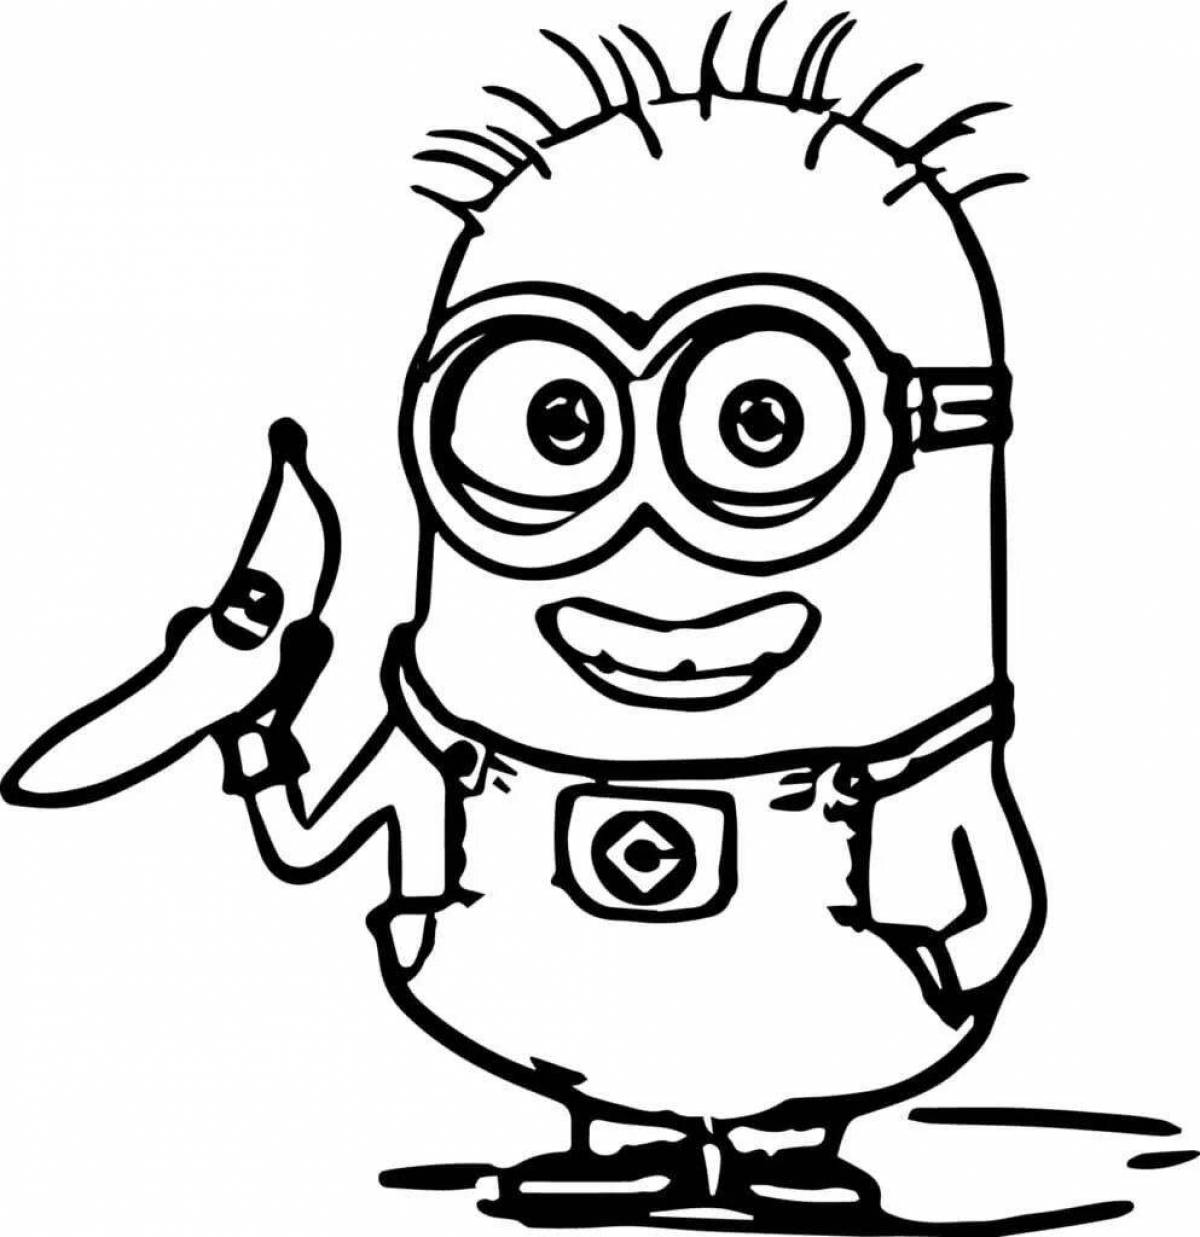 Minion playful coloring for kids